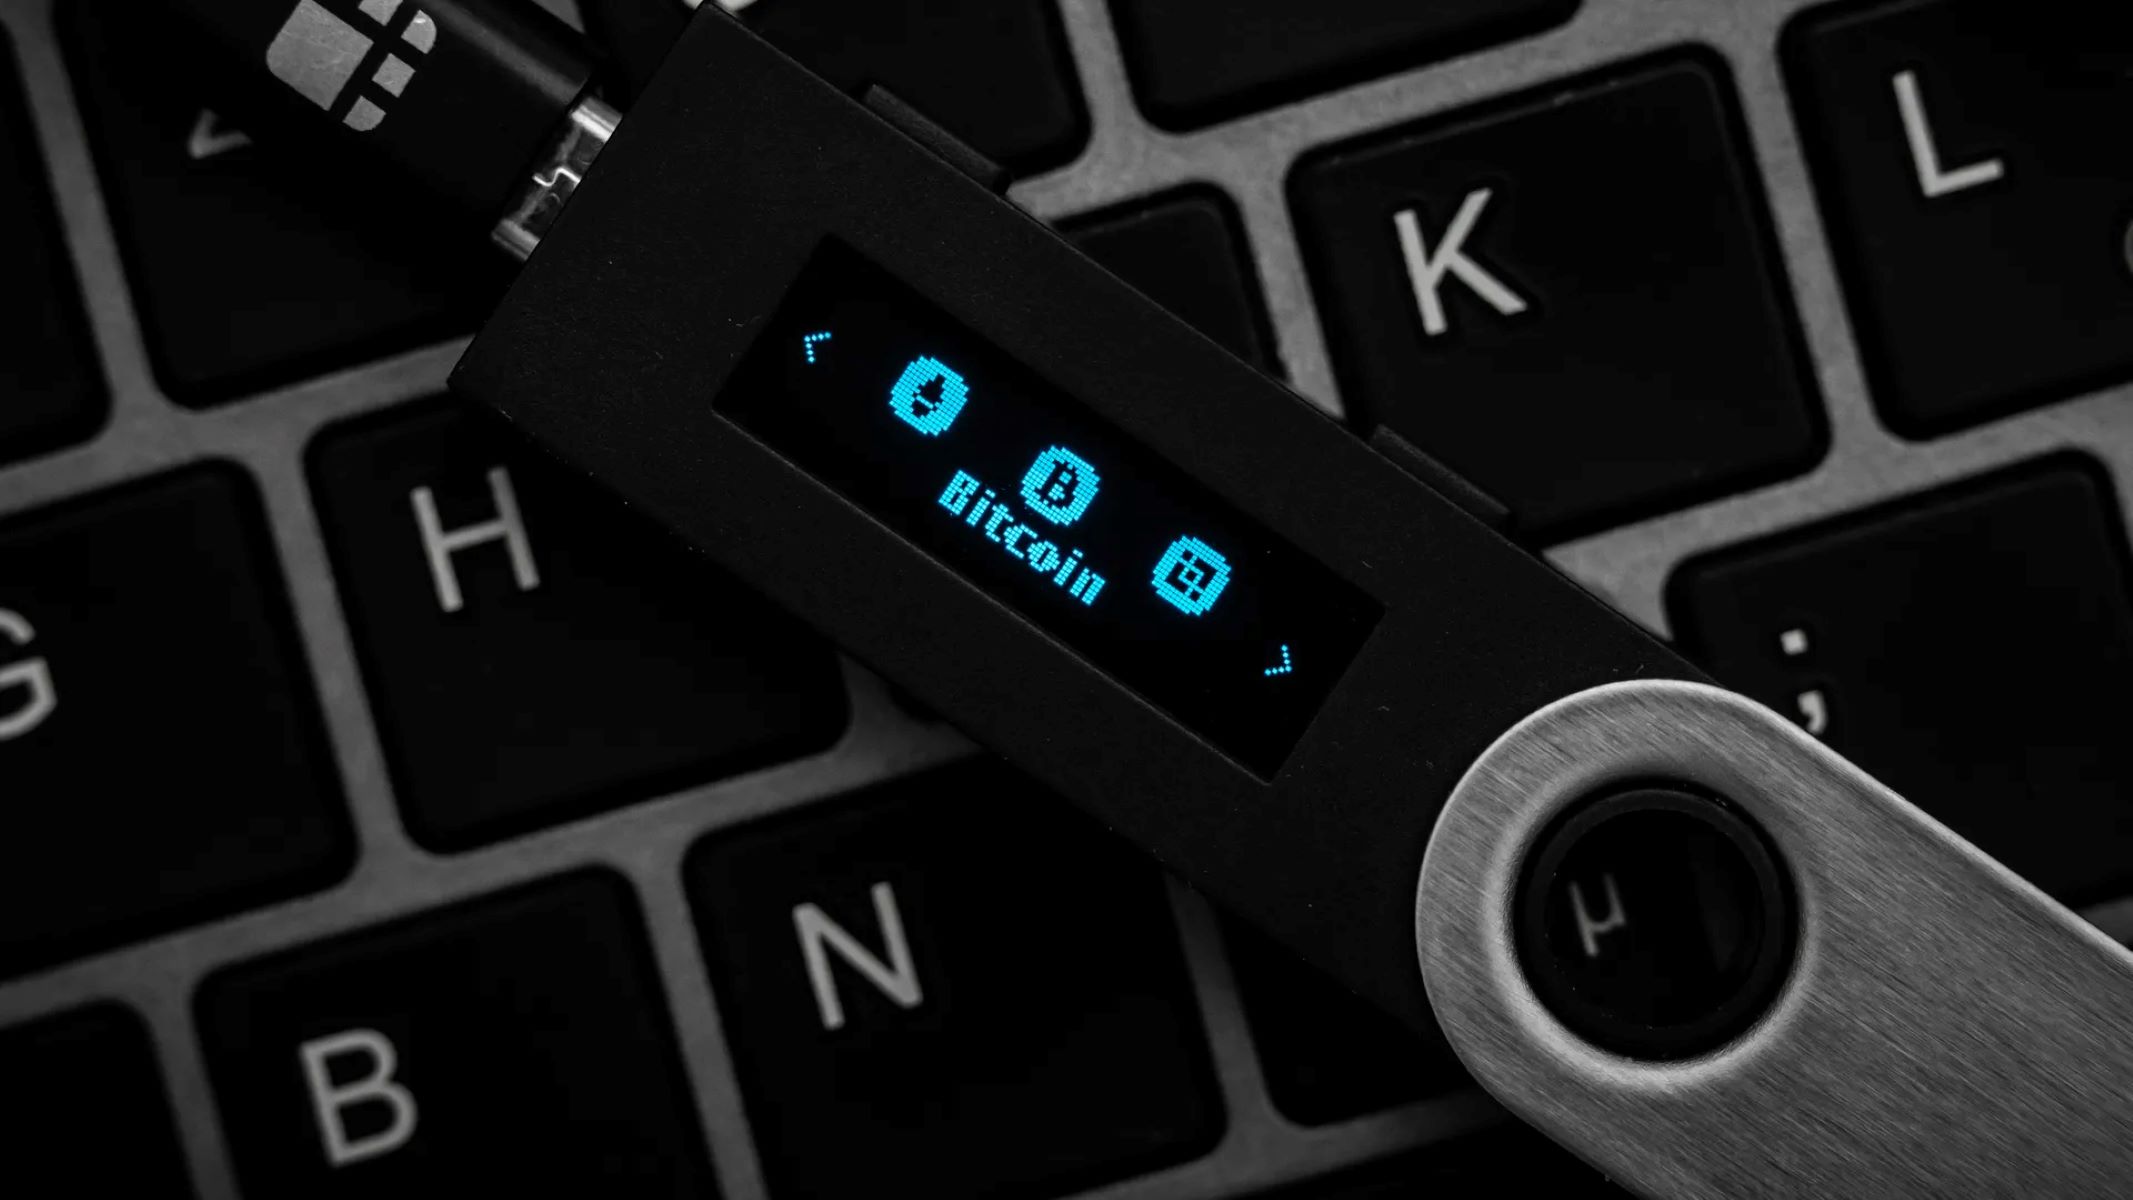 How To Make A Hardware Wallet With A USB Stick